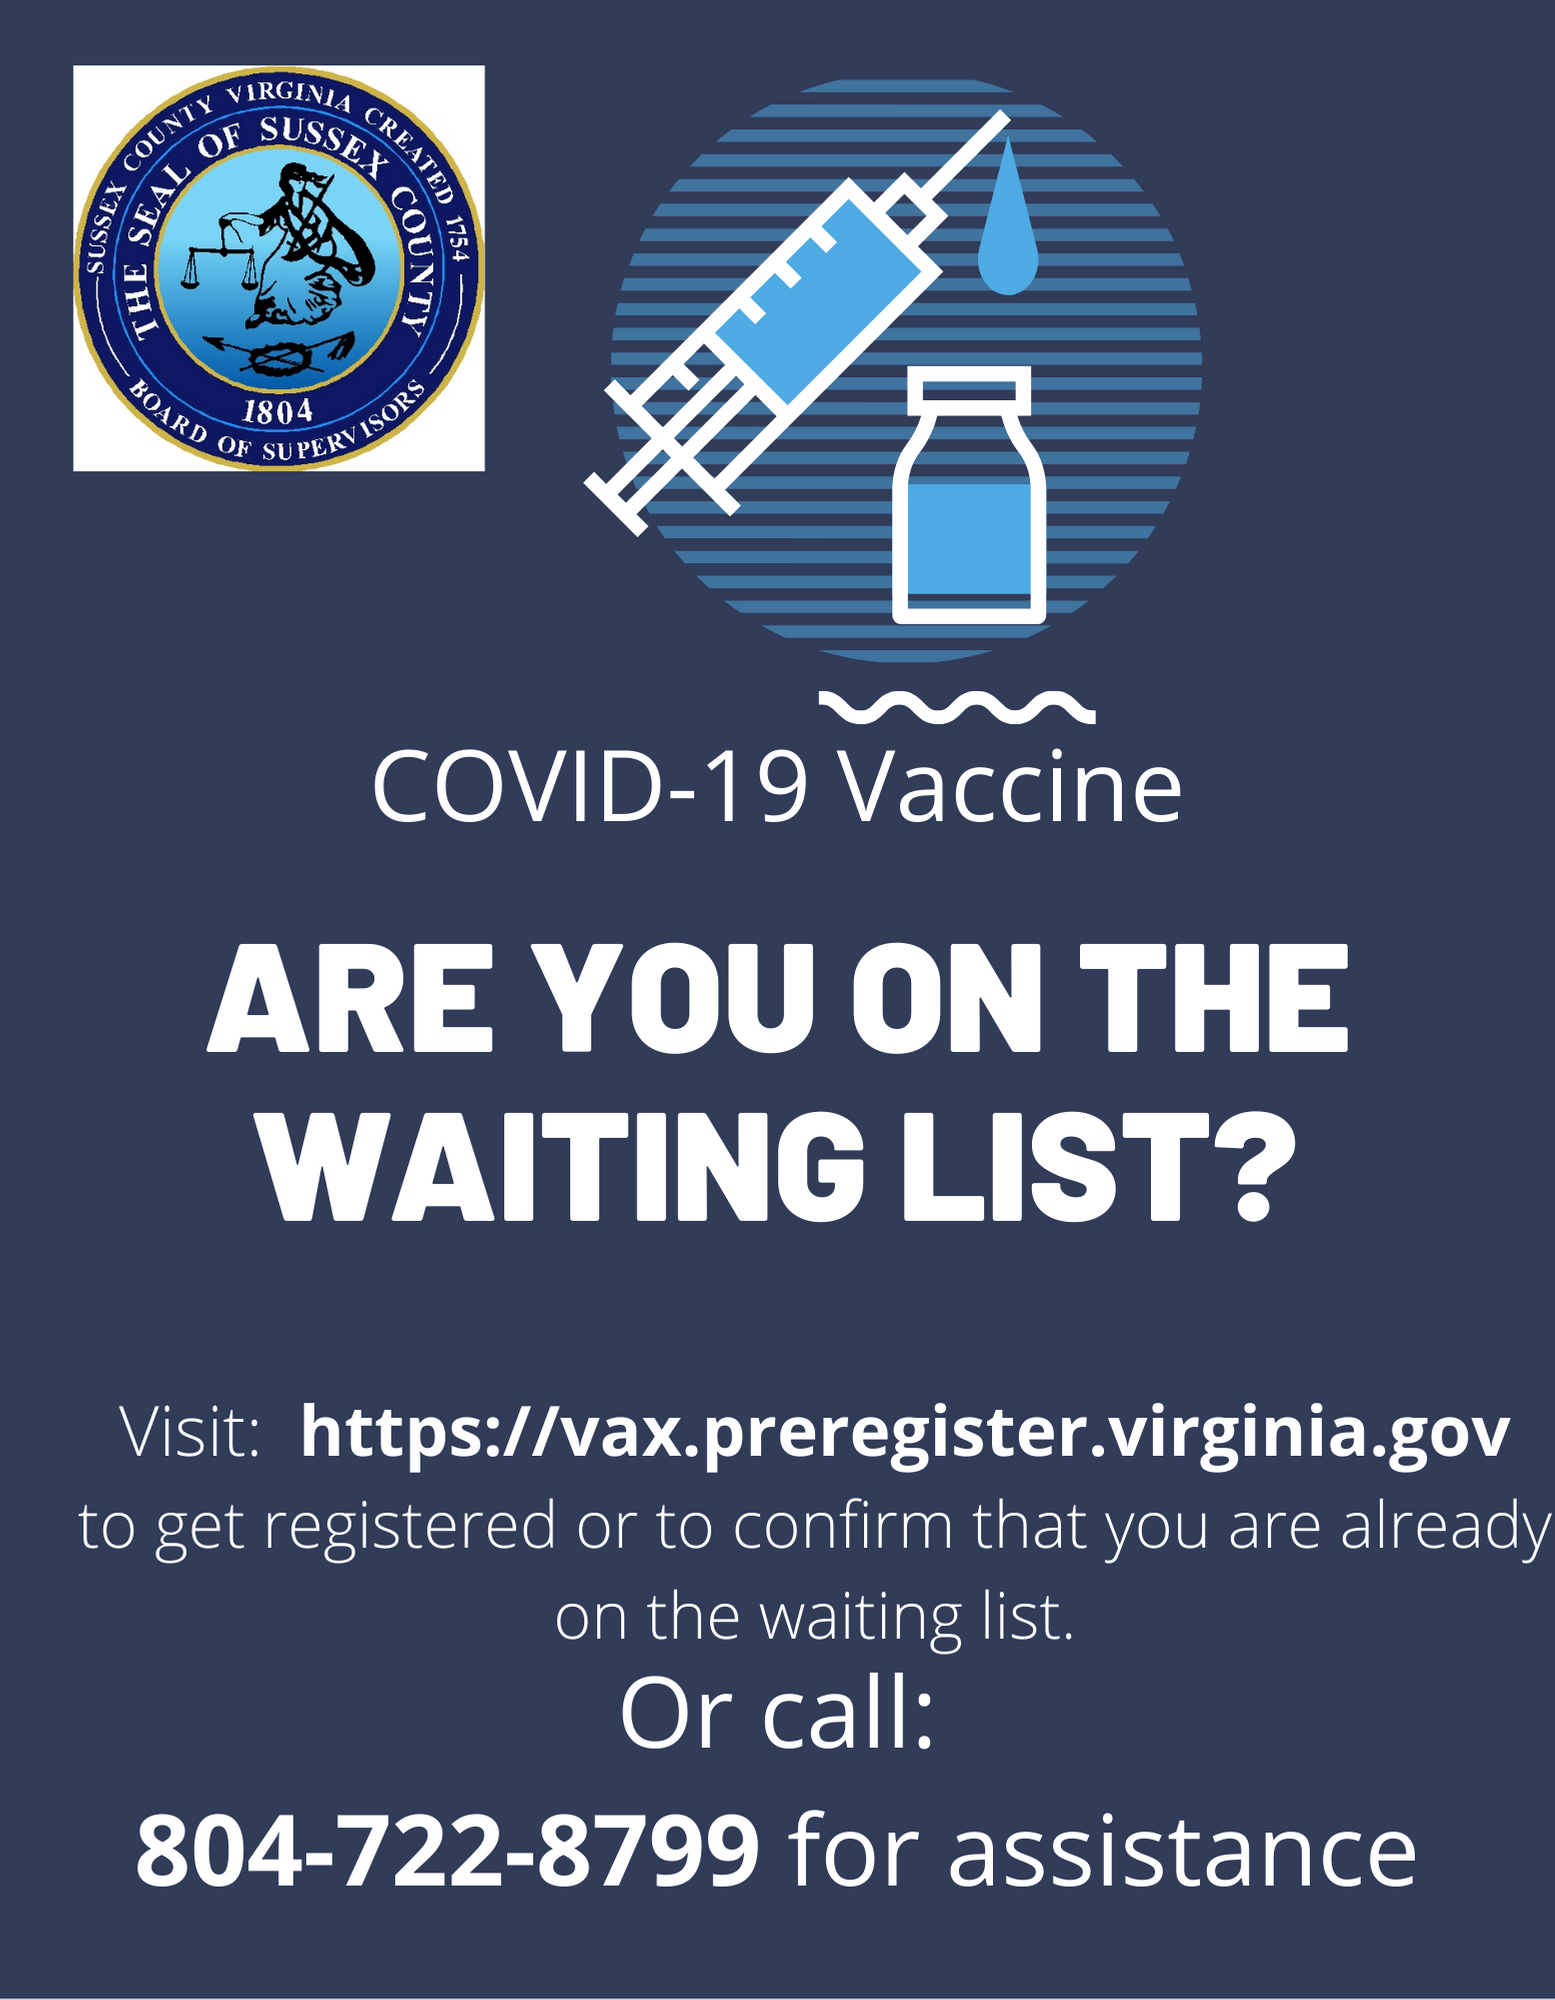 Visit https://vax.preregister.virginia.gov to get registered or to confirm that you are already on the waiting list.  Or call: 804-722-8799 for assistance